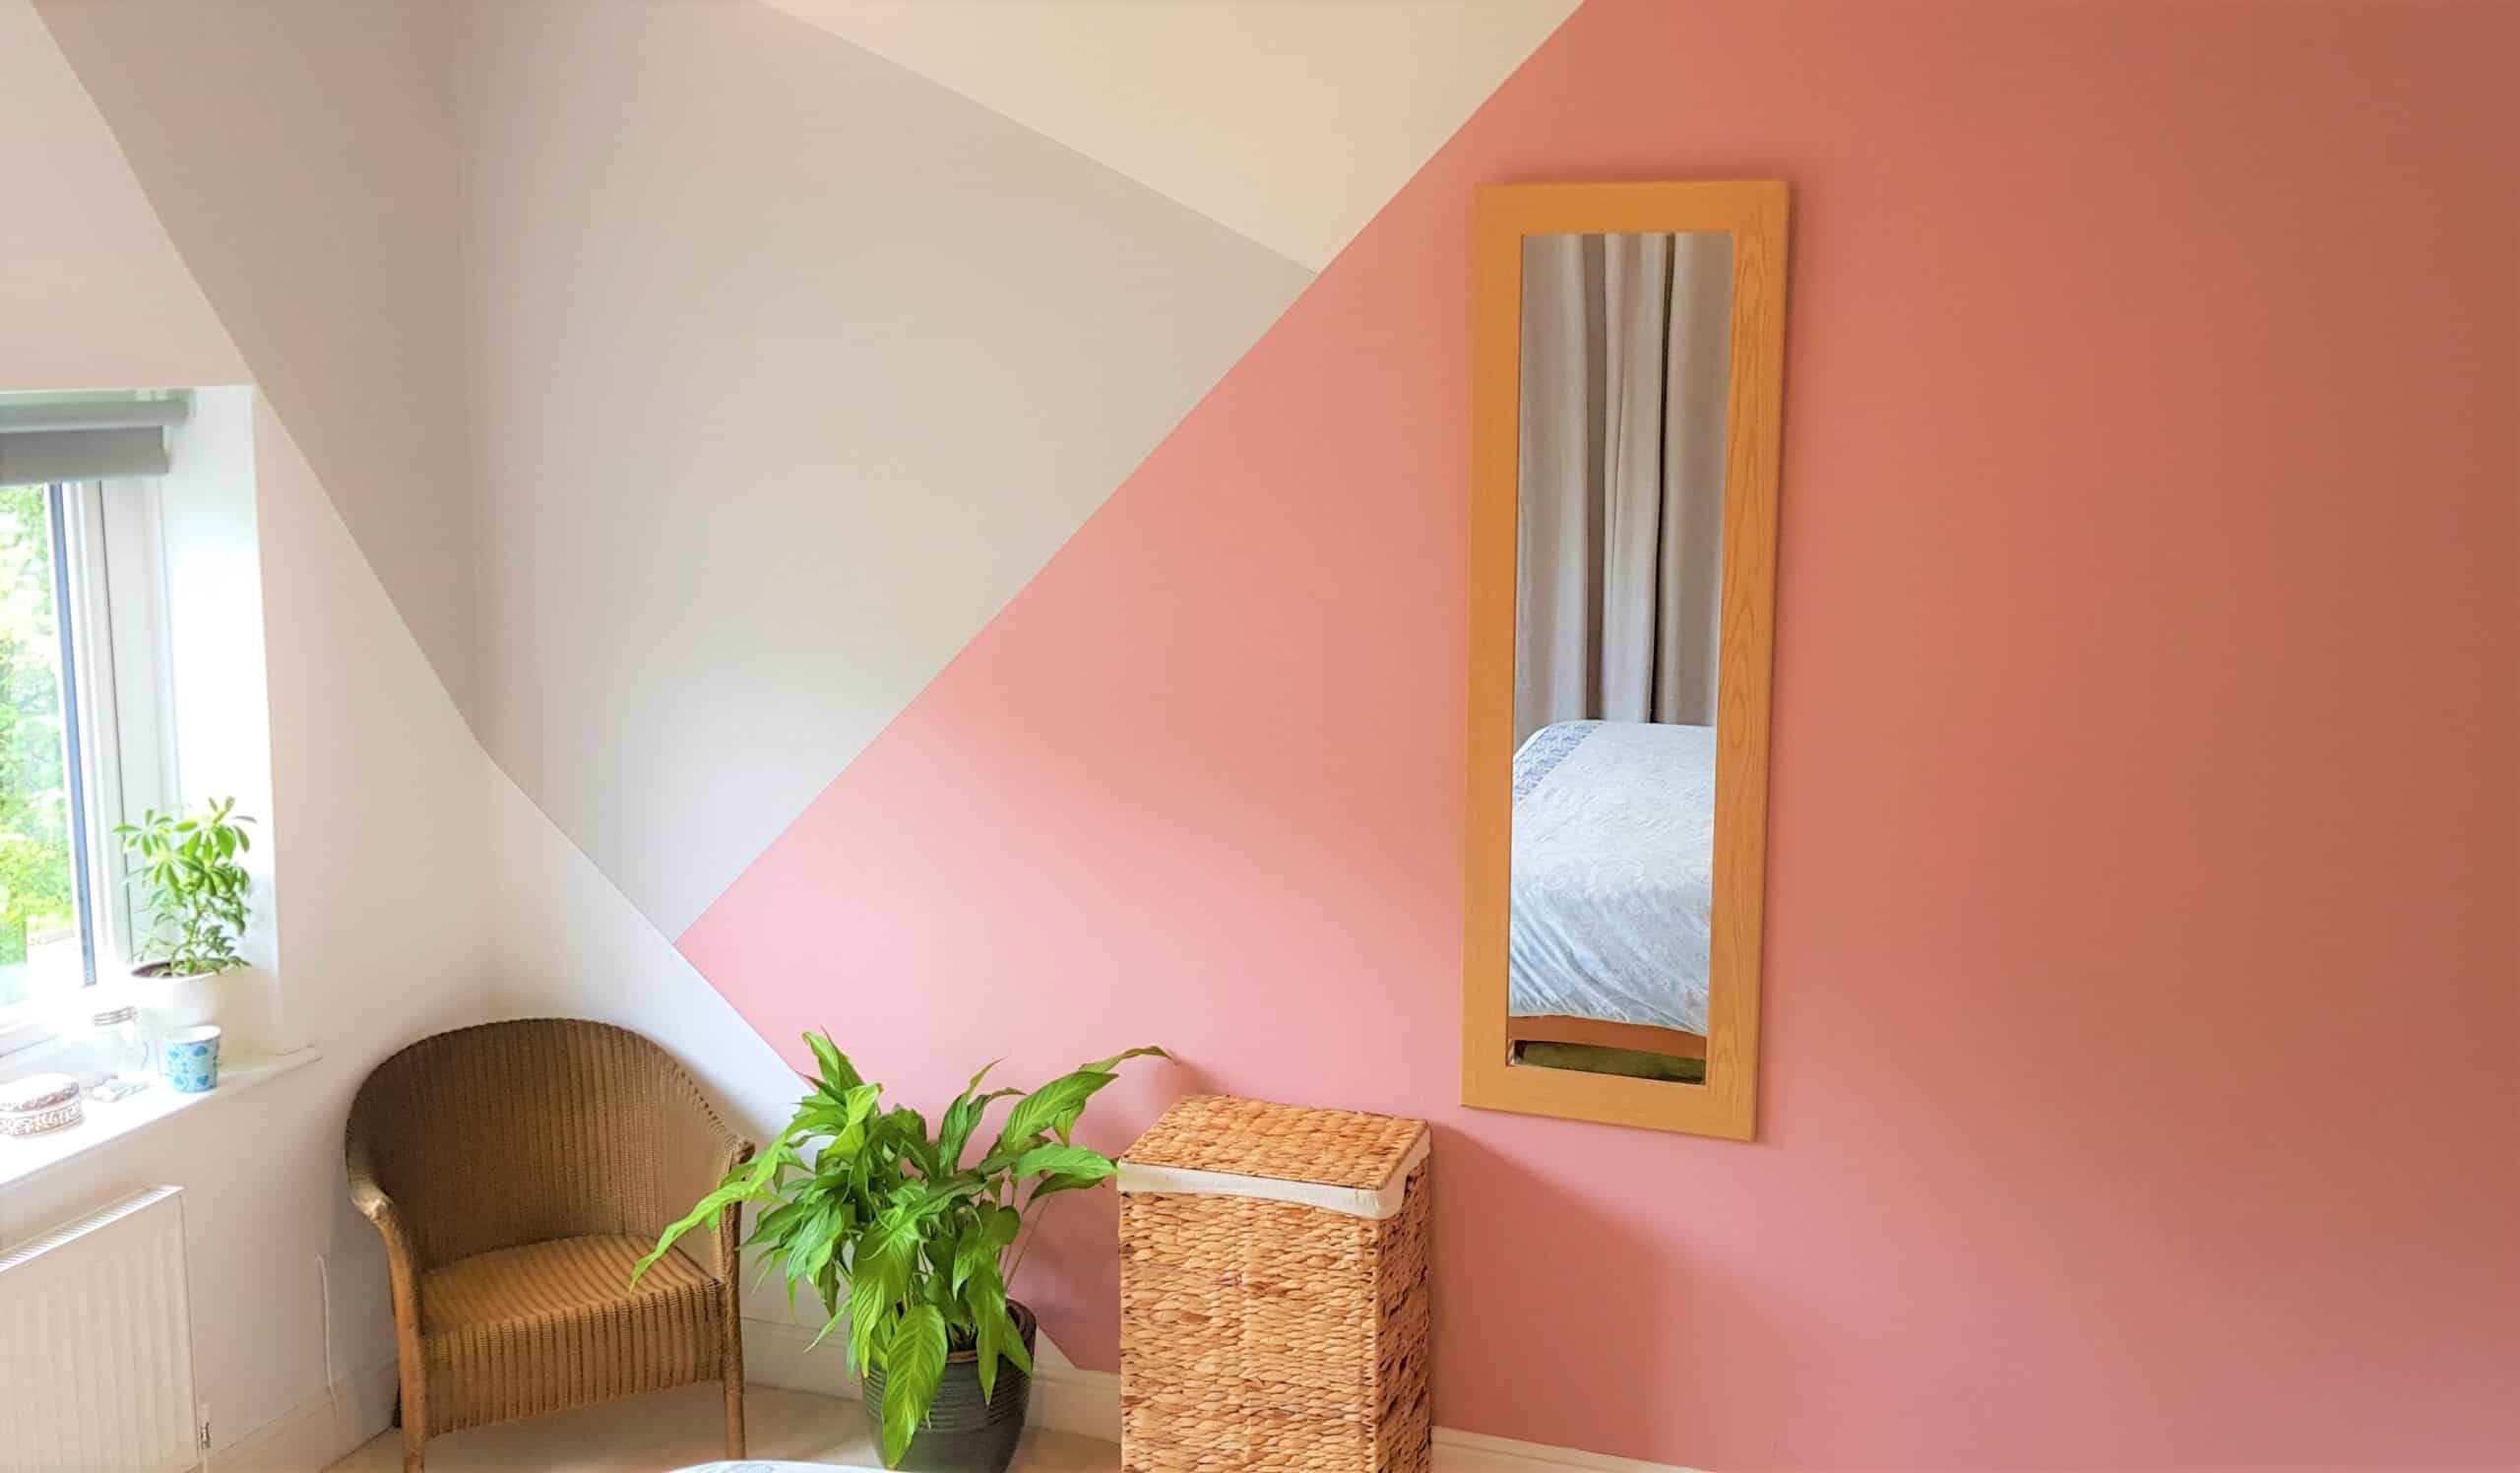 bedroom with geometric wall painting with shades of pink and cream